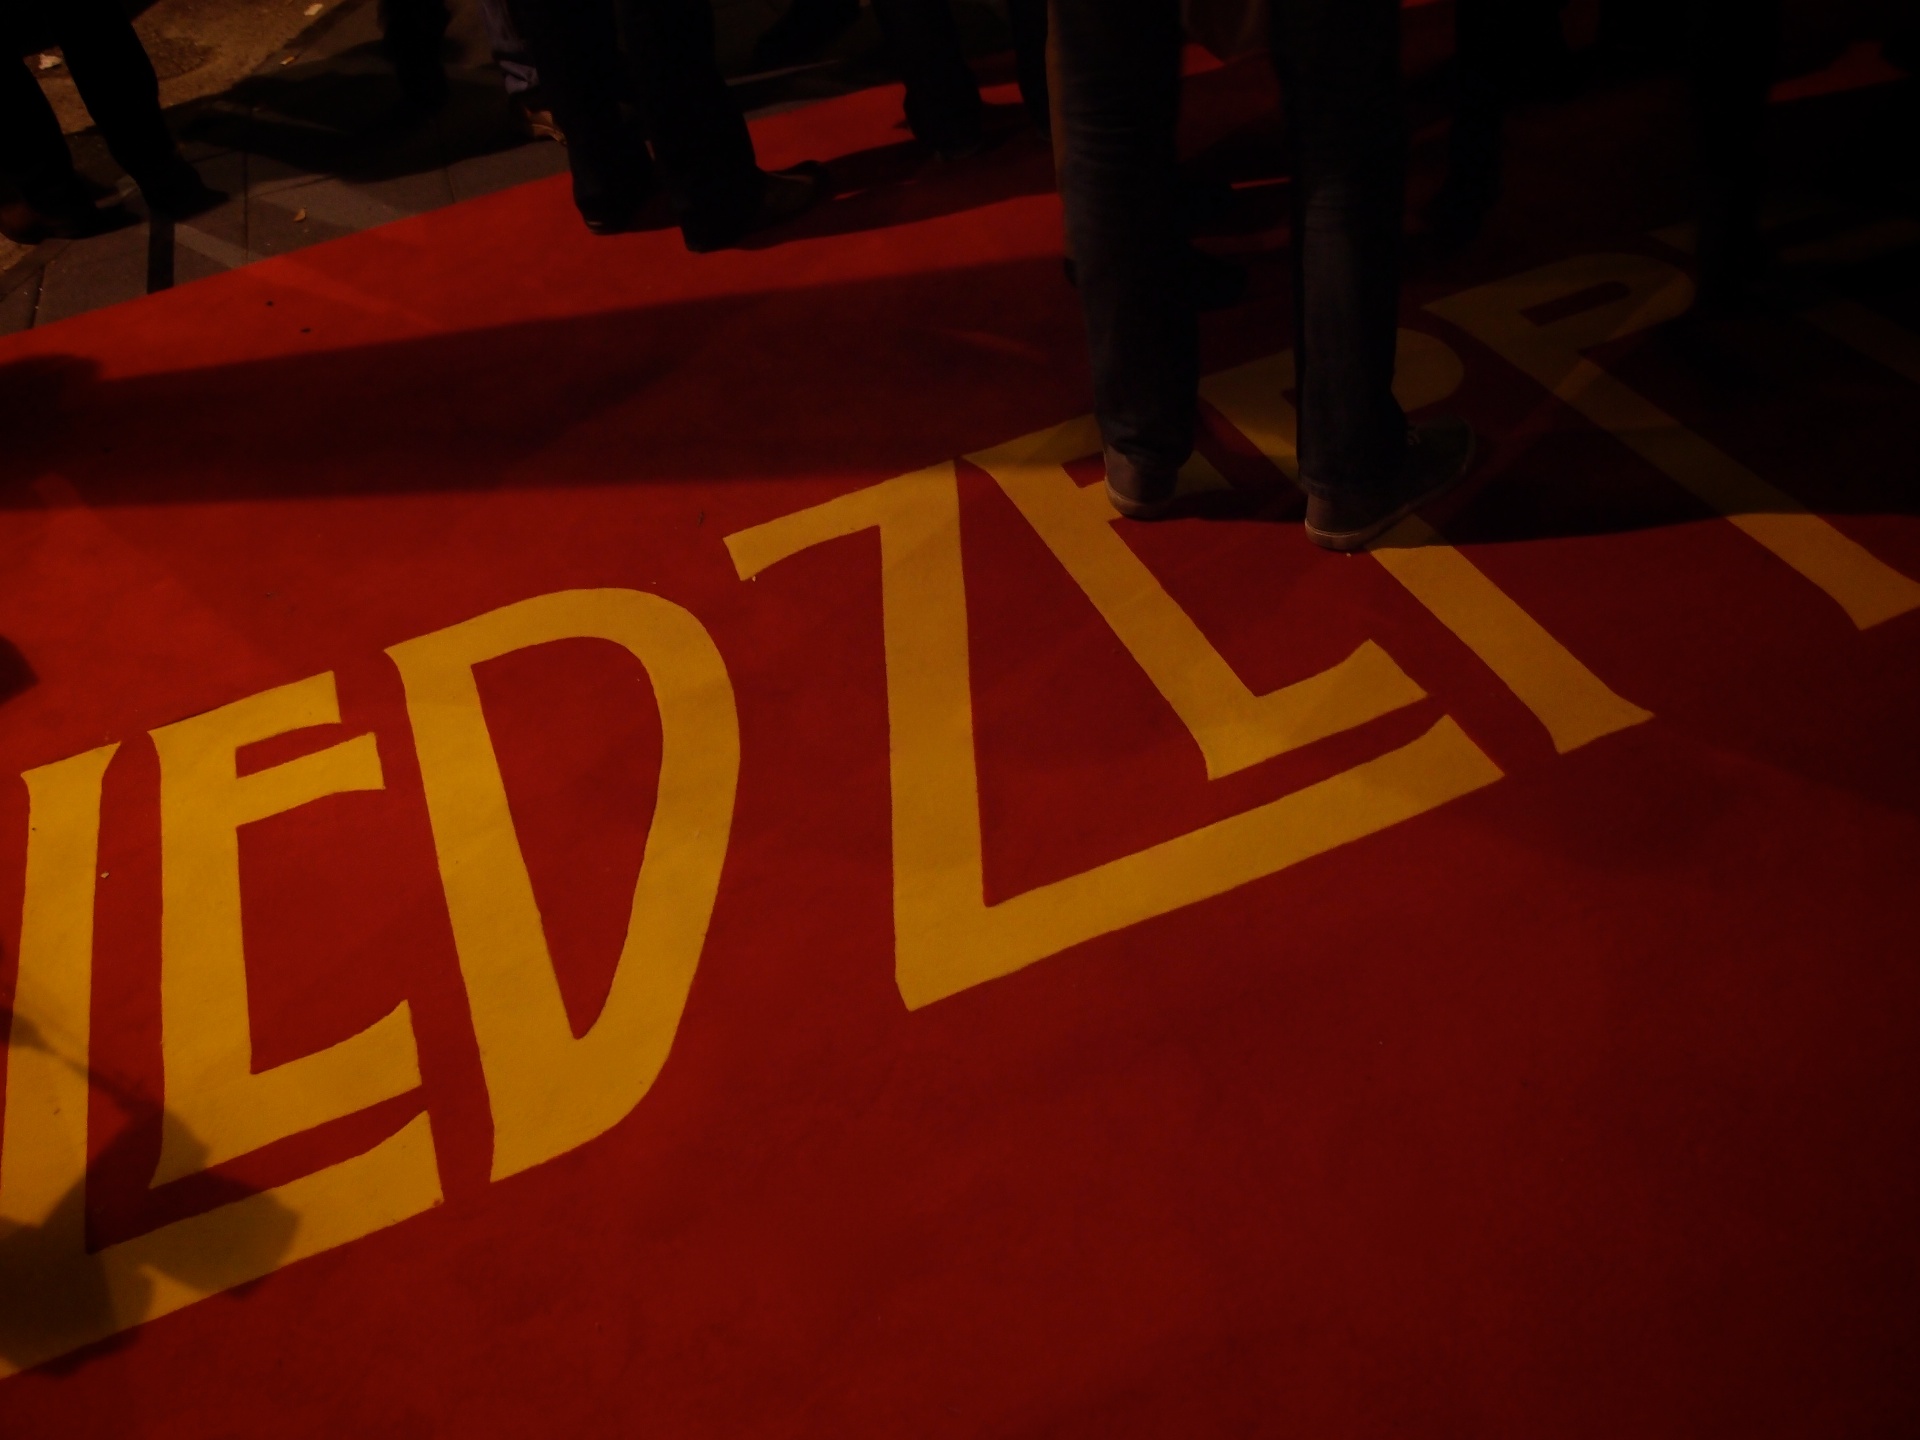 the words'weditzl'painted on the carpet of a red carpet